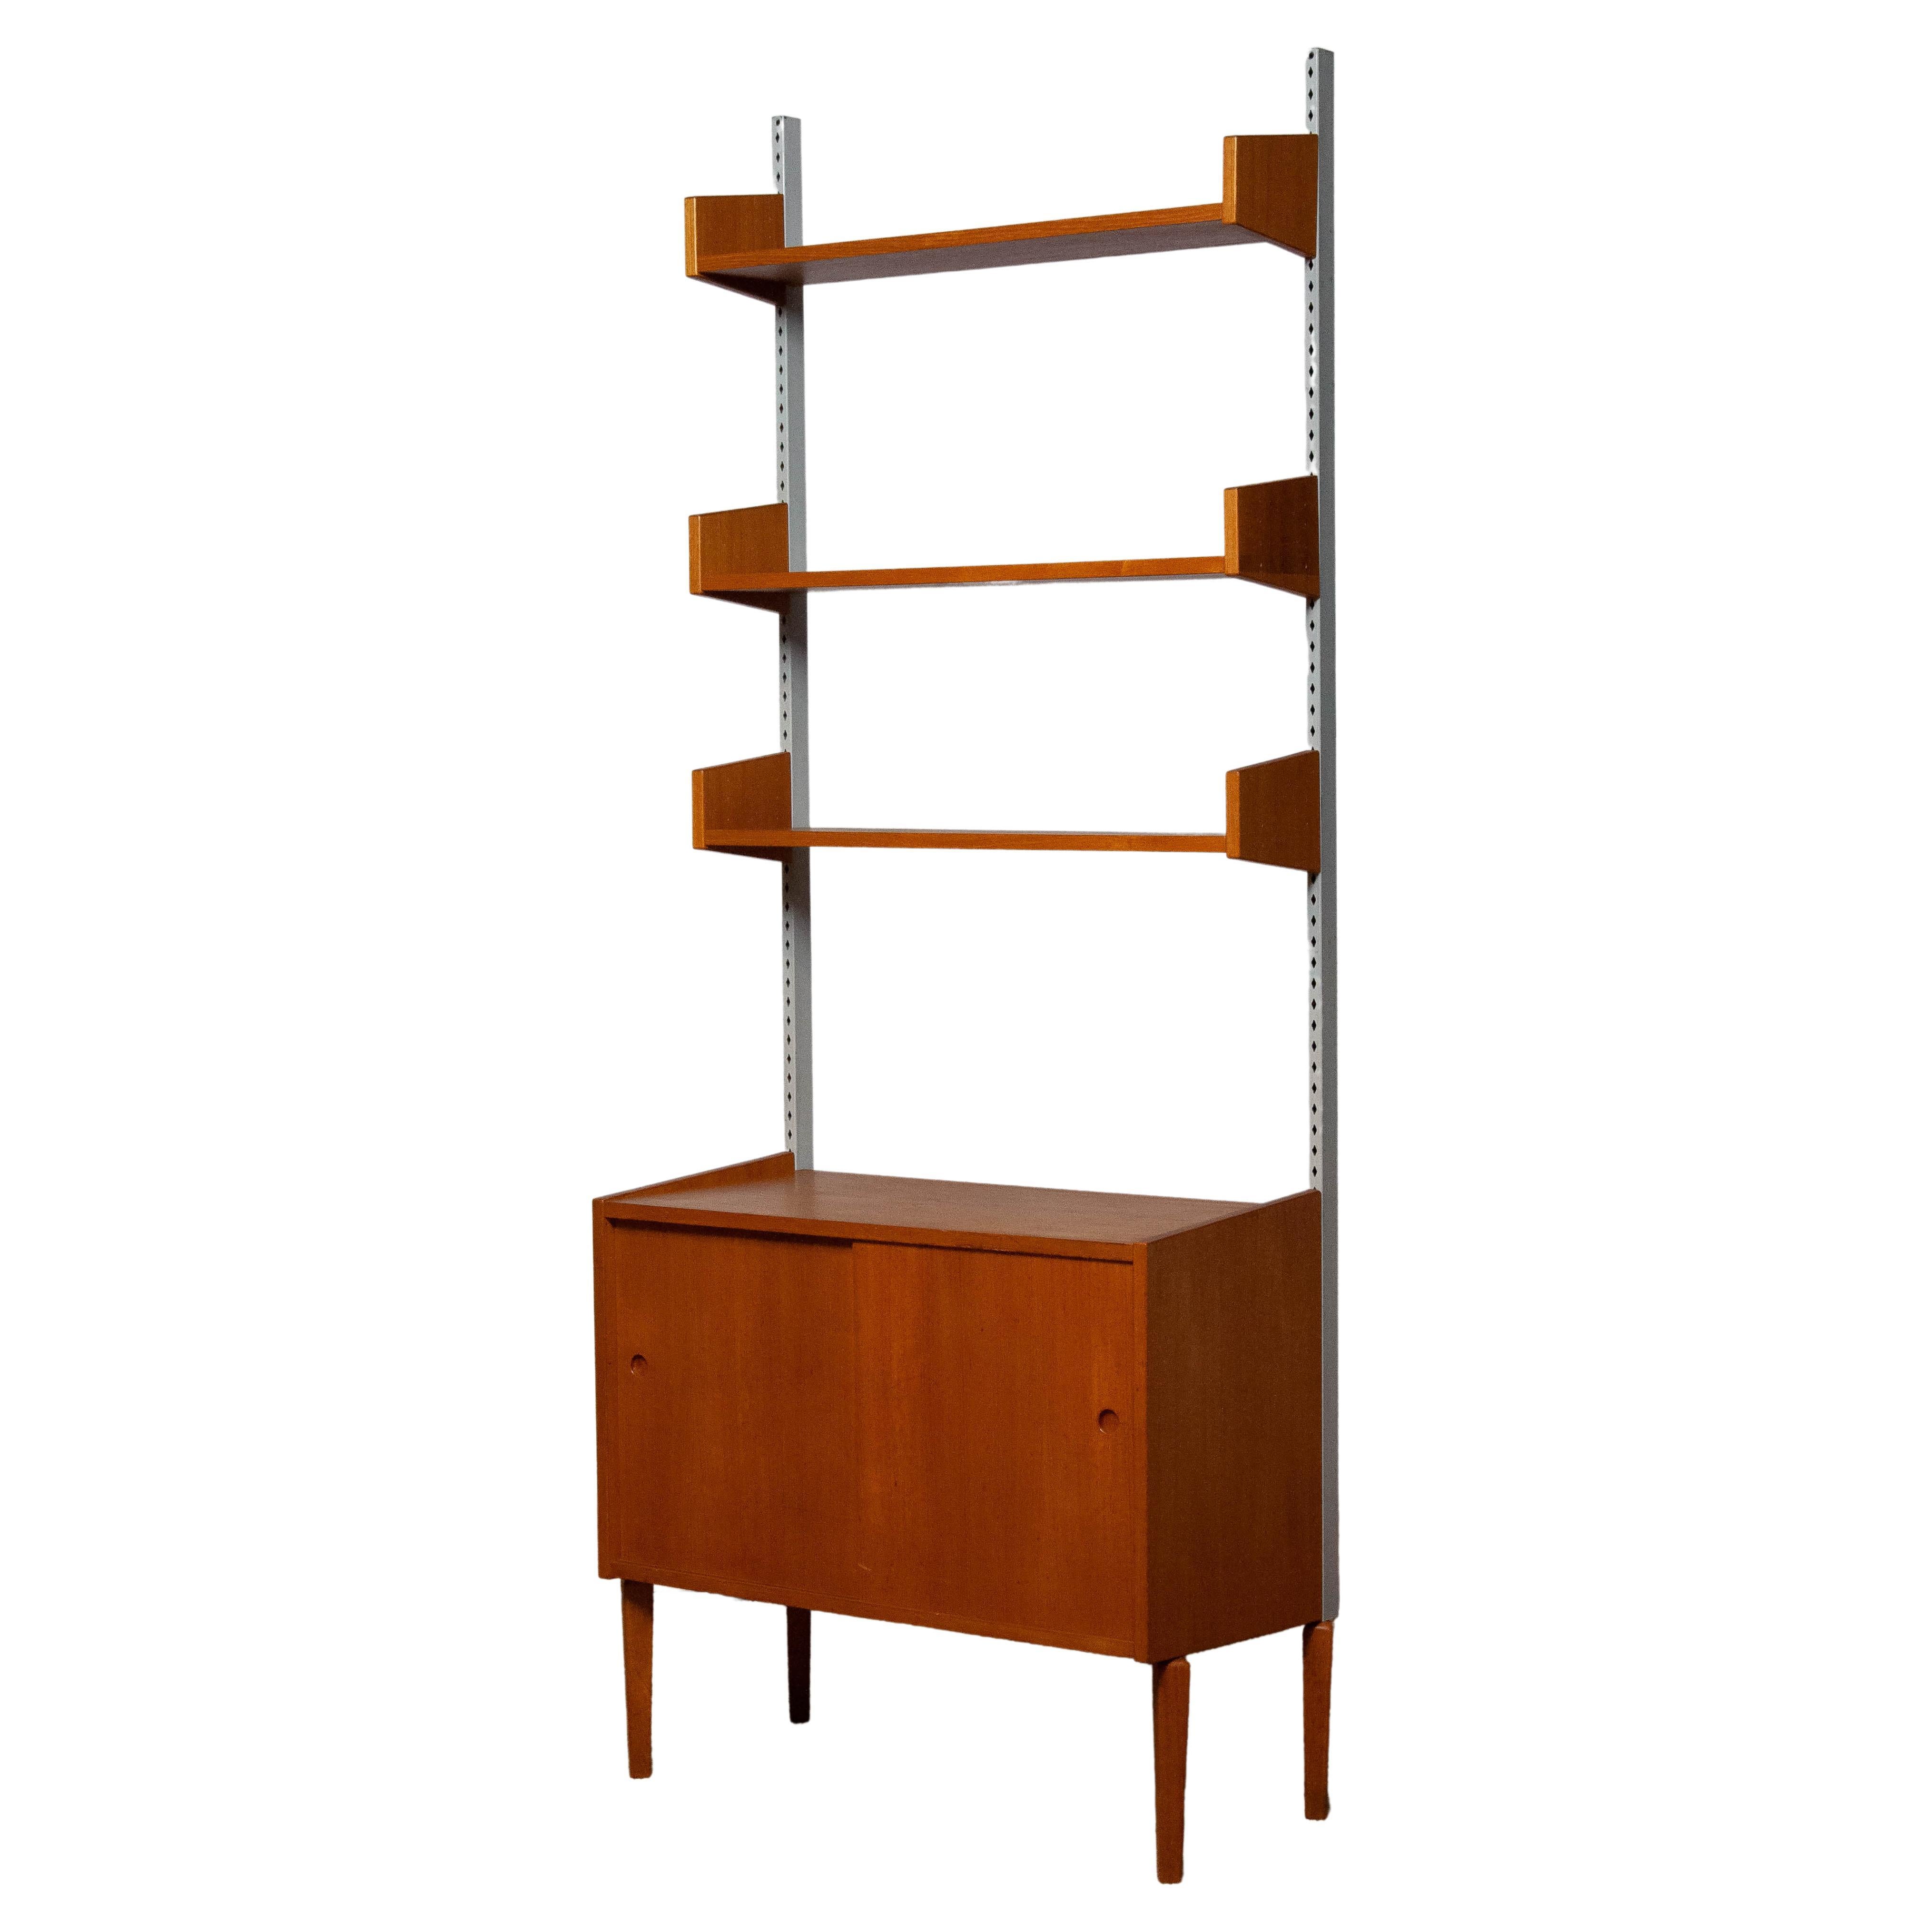 1950's Teak Shelf System / Bookcase in Teak with Steel Bars by Harald Lundqvist